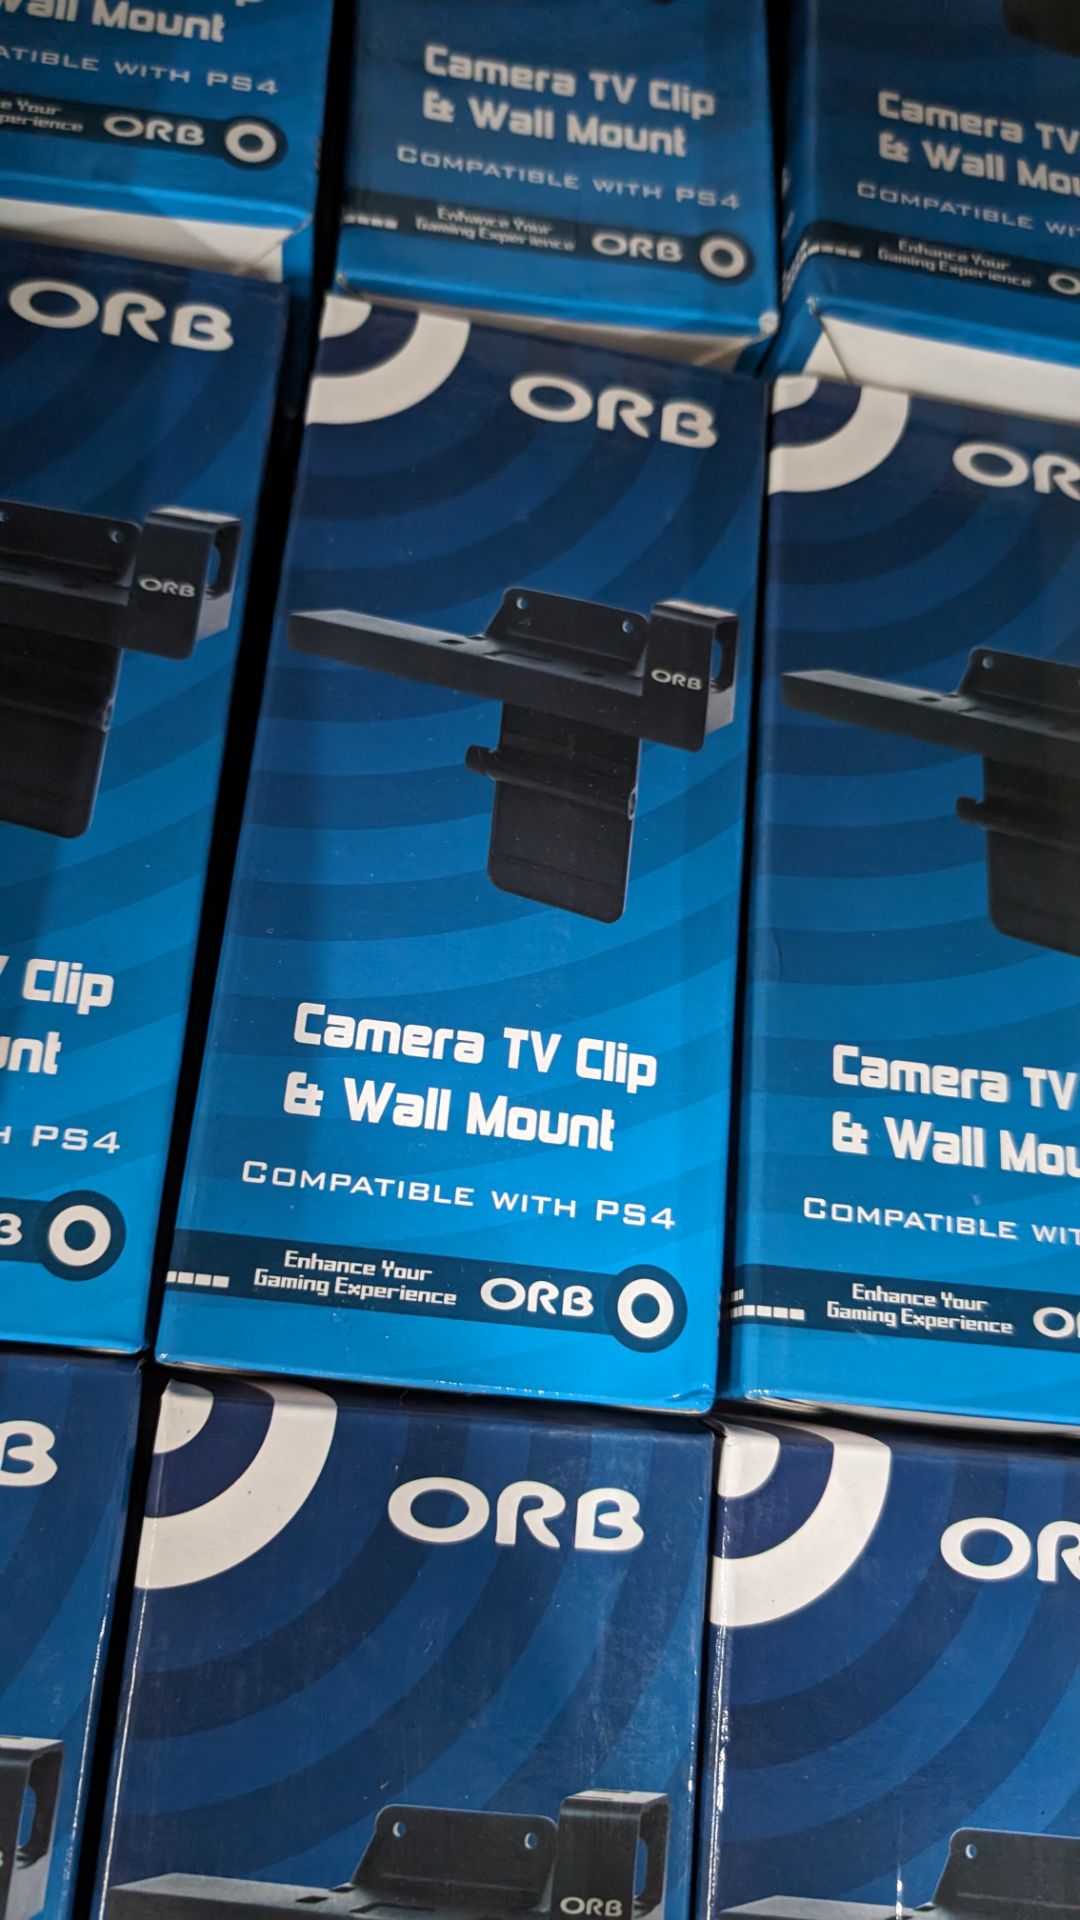 18 off Orb camera TV clip/wall mount packs for PS4